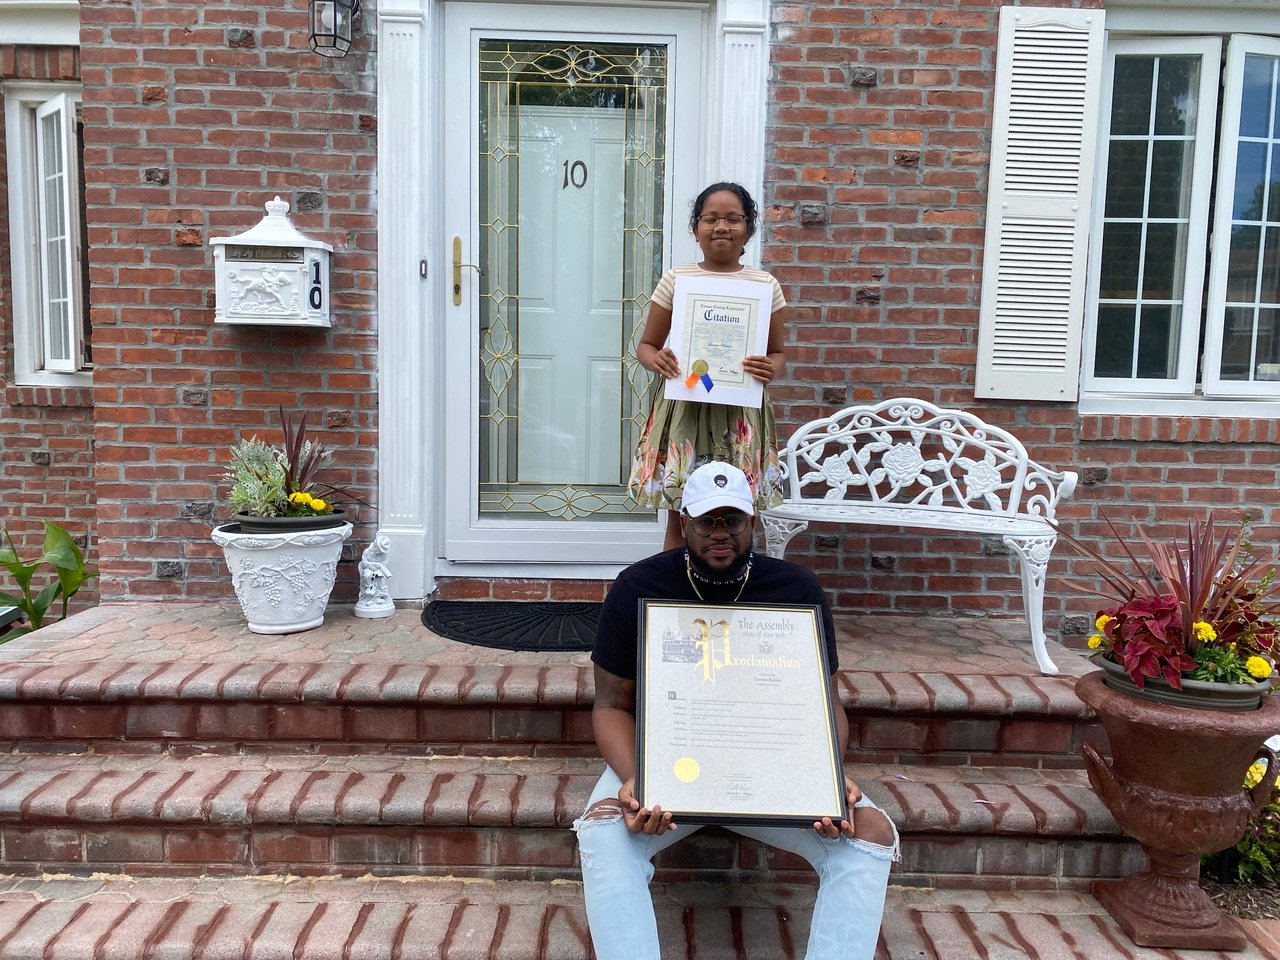 Lianna and her father at their Elmont home, where State Assemblywoman Michaelle Solages and her brother, County Legislator Carrié Solages, presented her with a proclamation honoring her for the strength and courage she displayed during her struggle with leukemia.